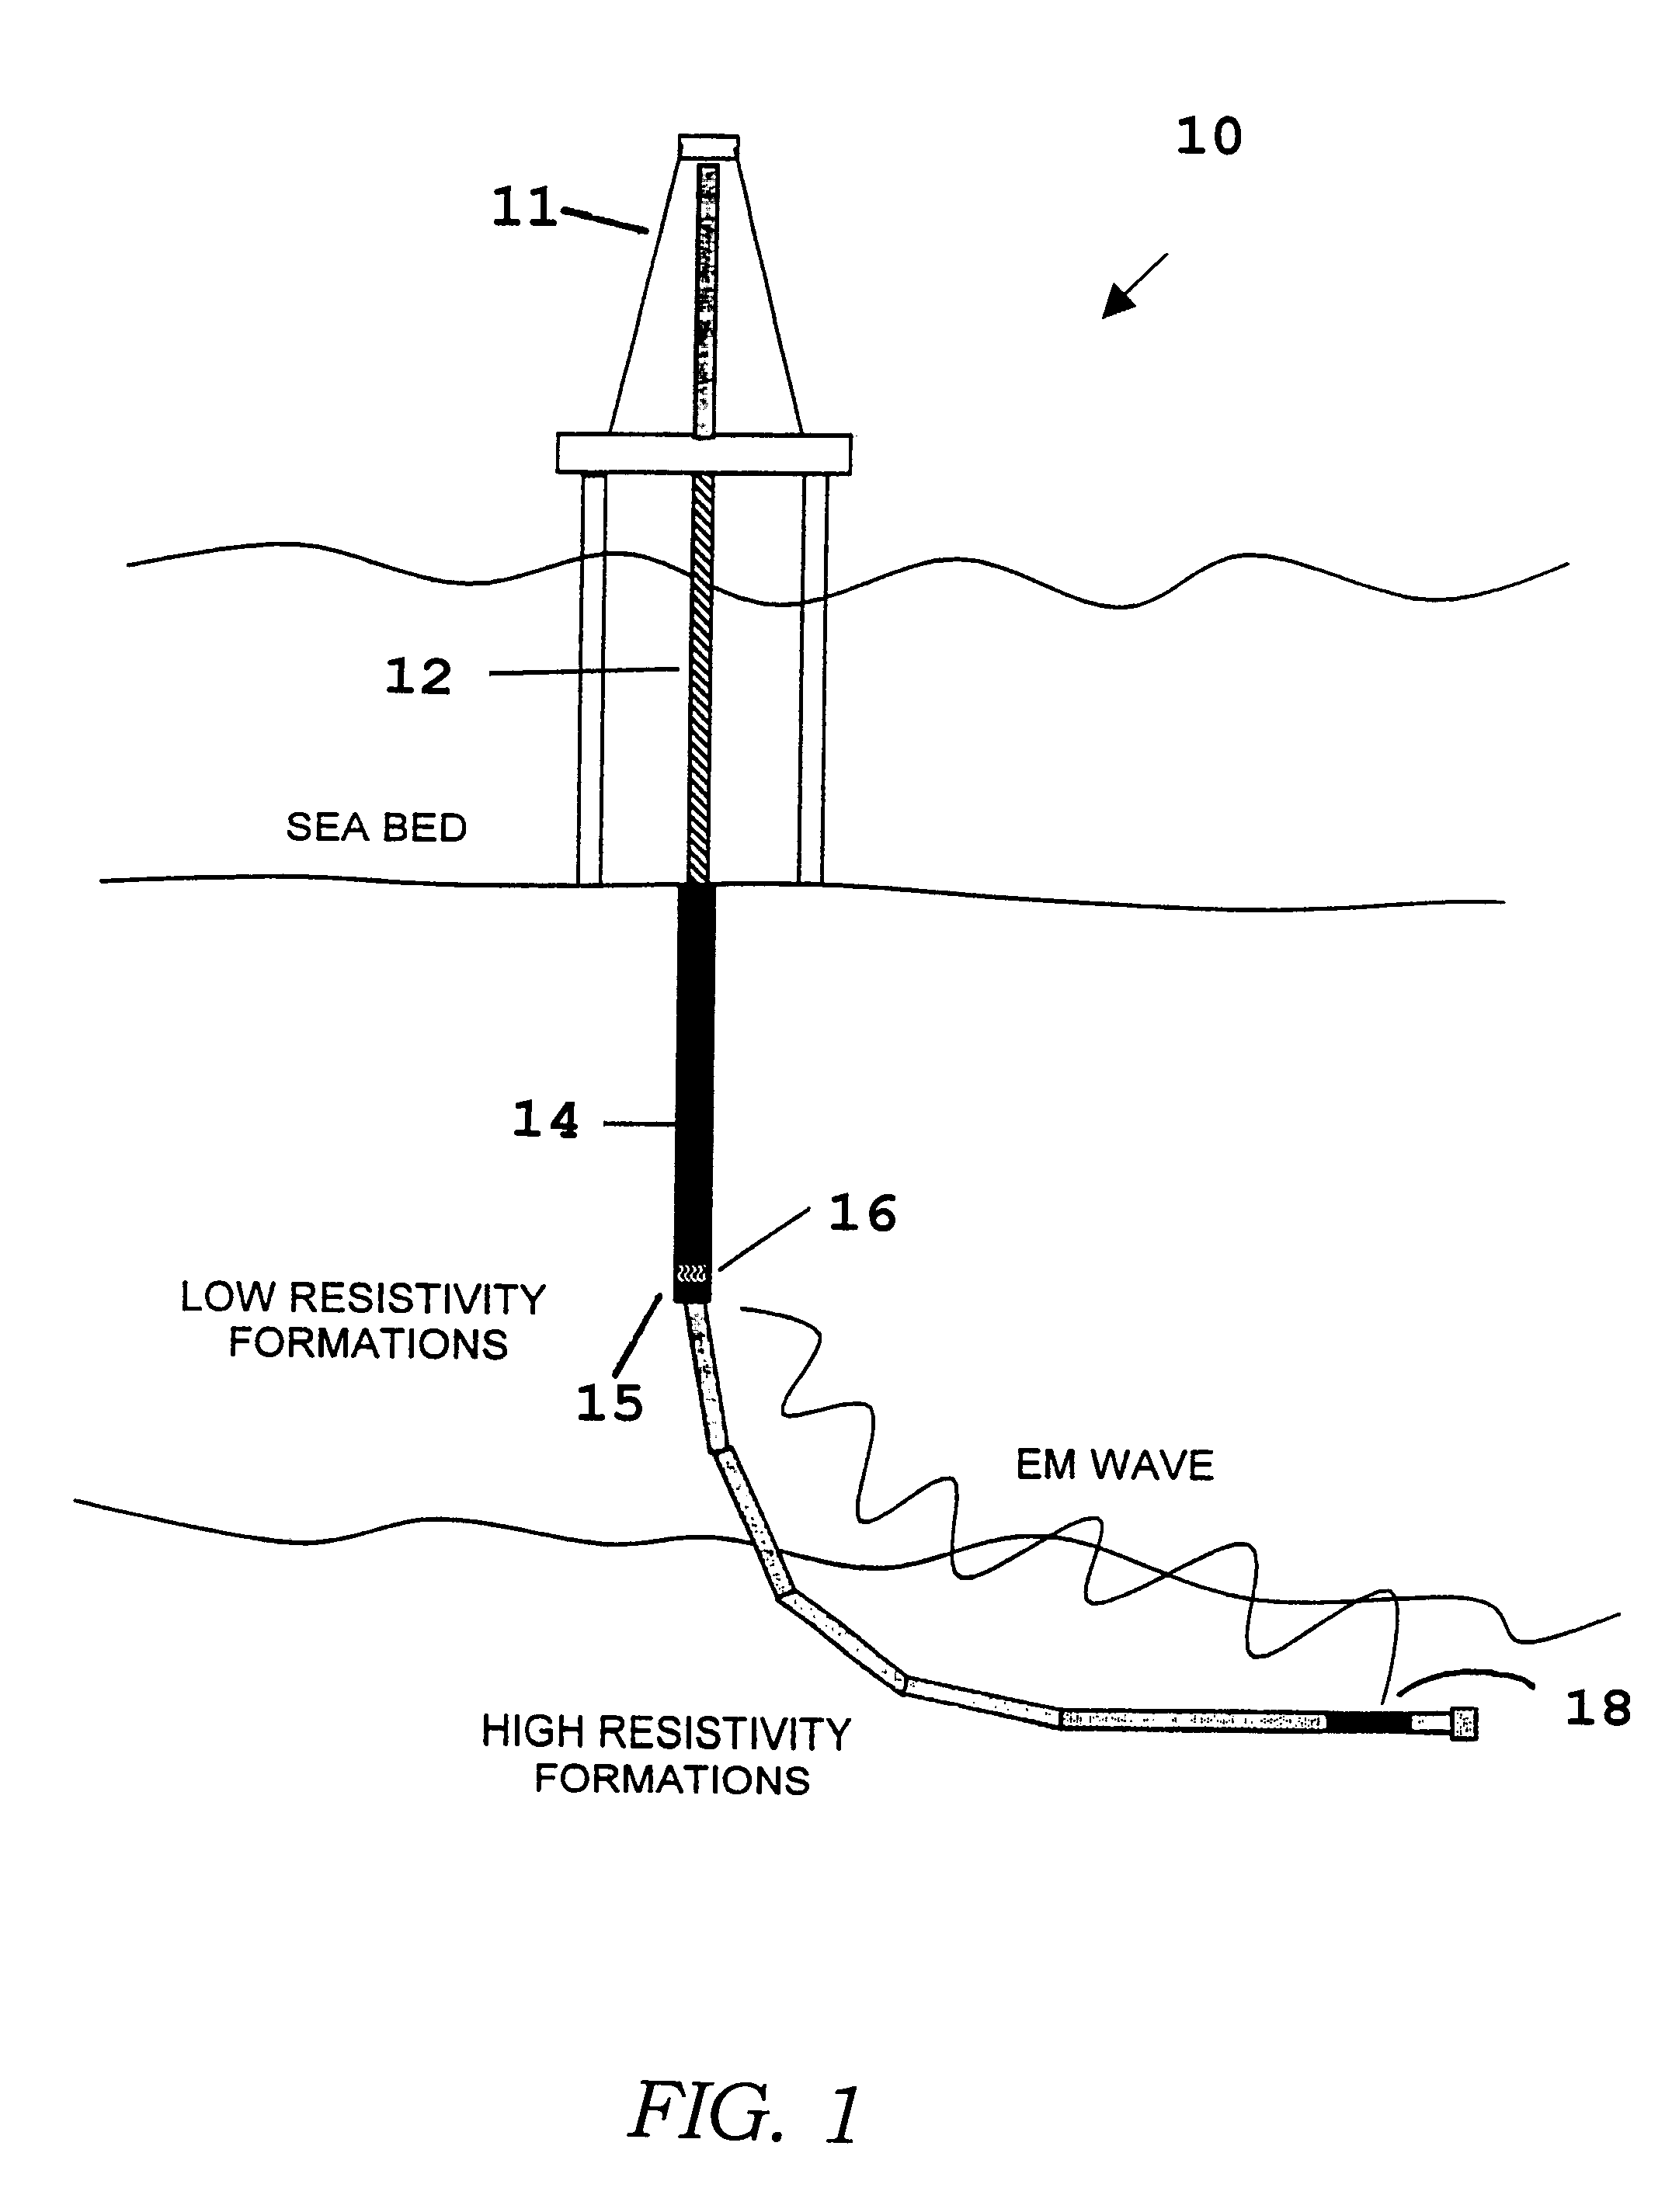 Measurement while drilling electromagnetic telemetry system using a fixed downhole receiver